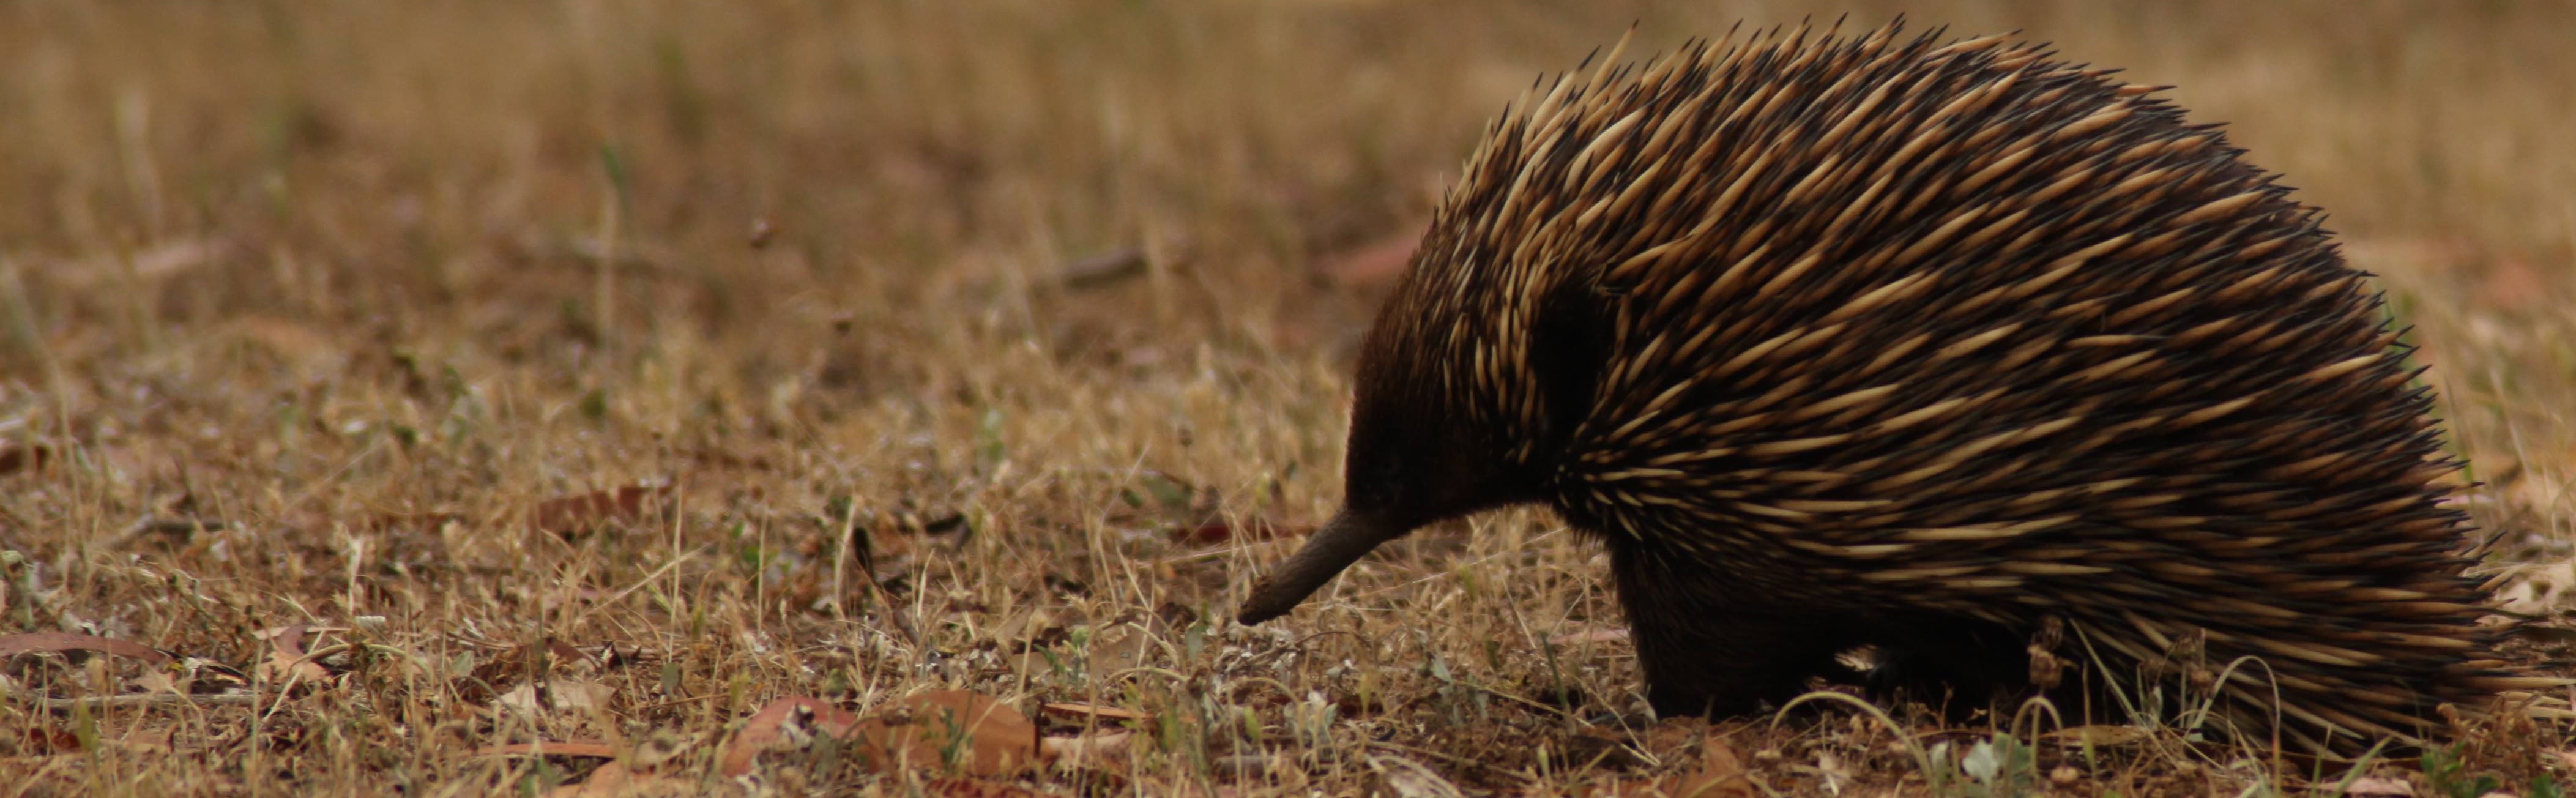 What is an Echidna?